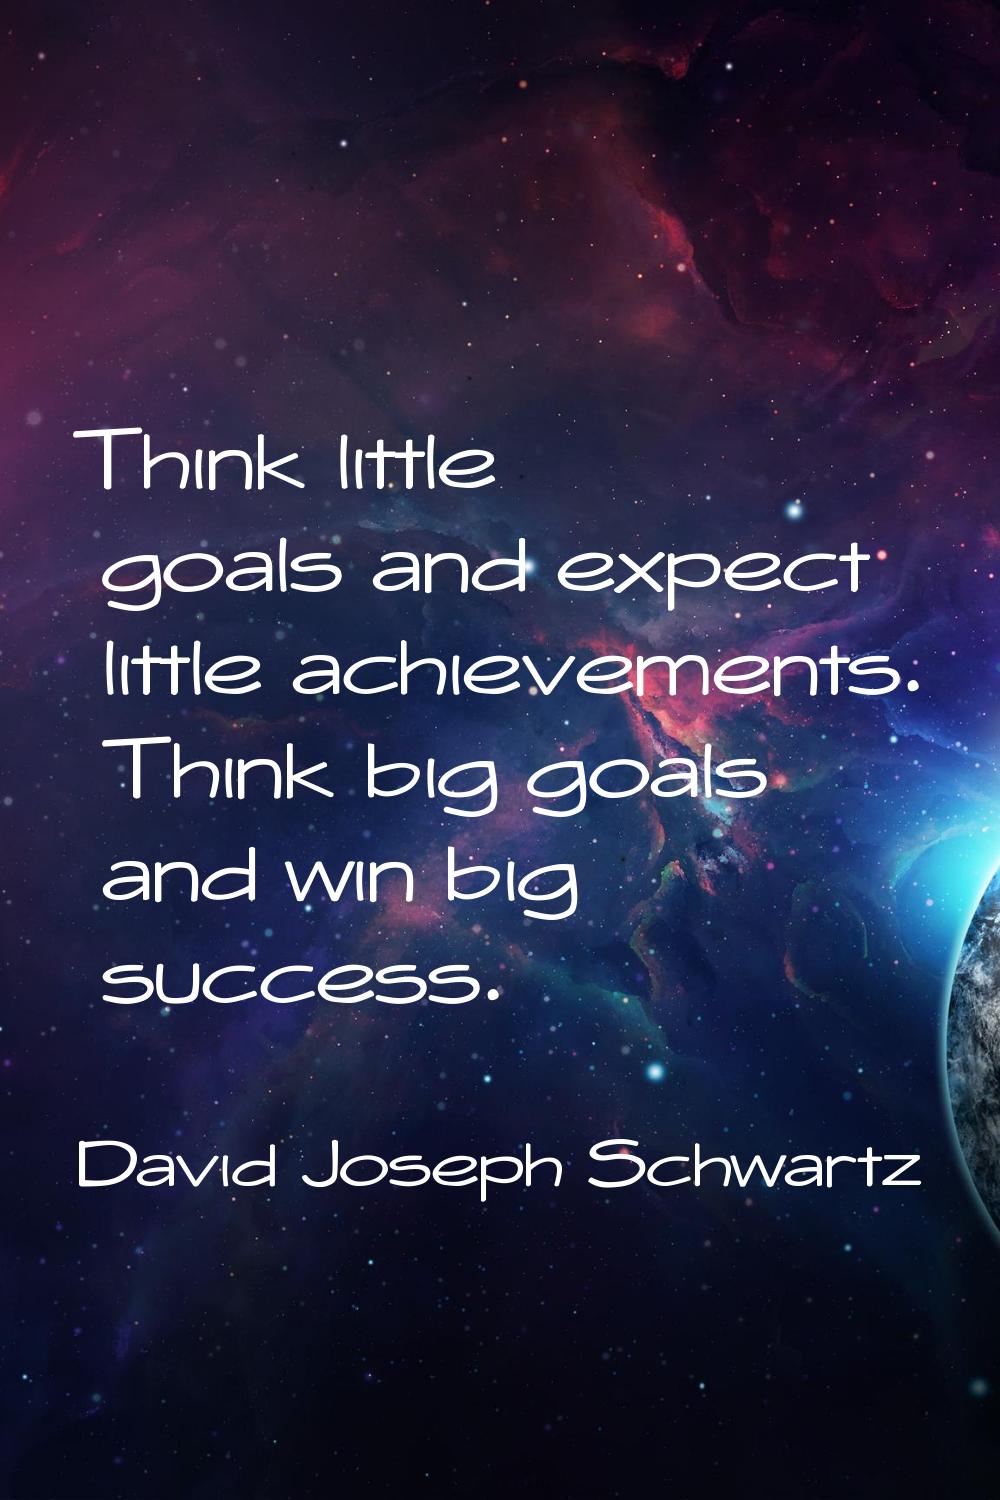 Think little goals and expect little achievements. Think big goals and win big success.